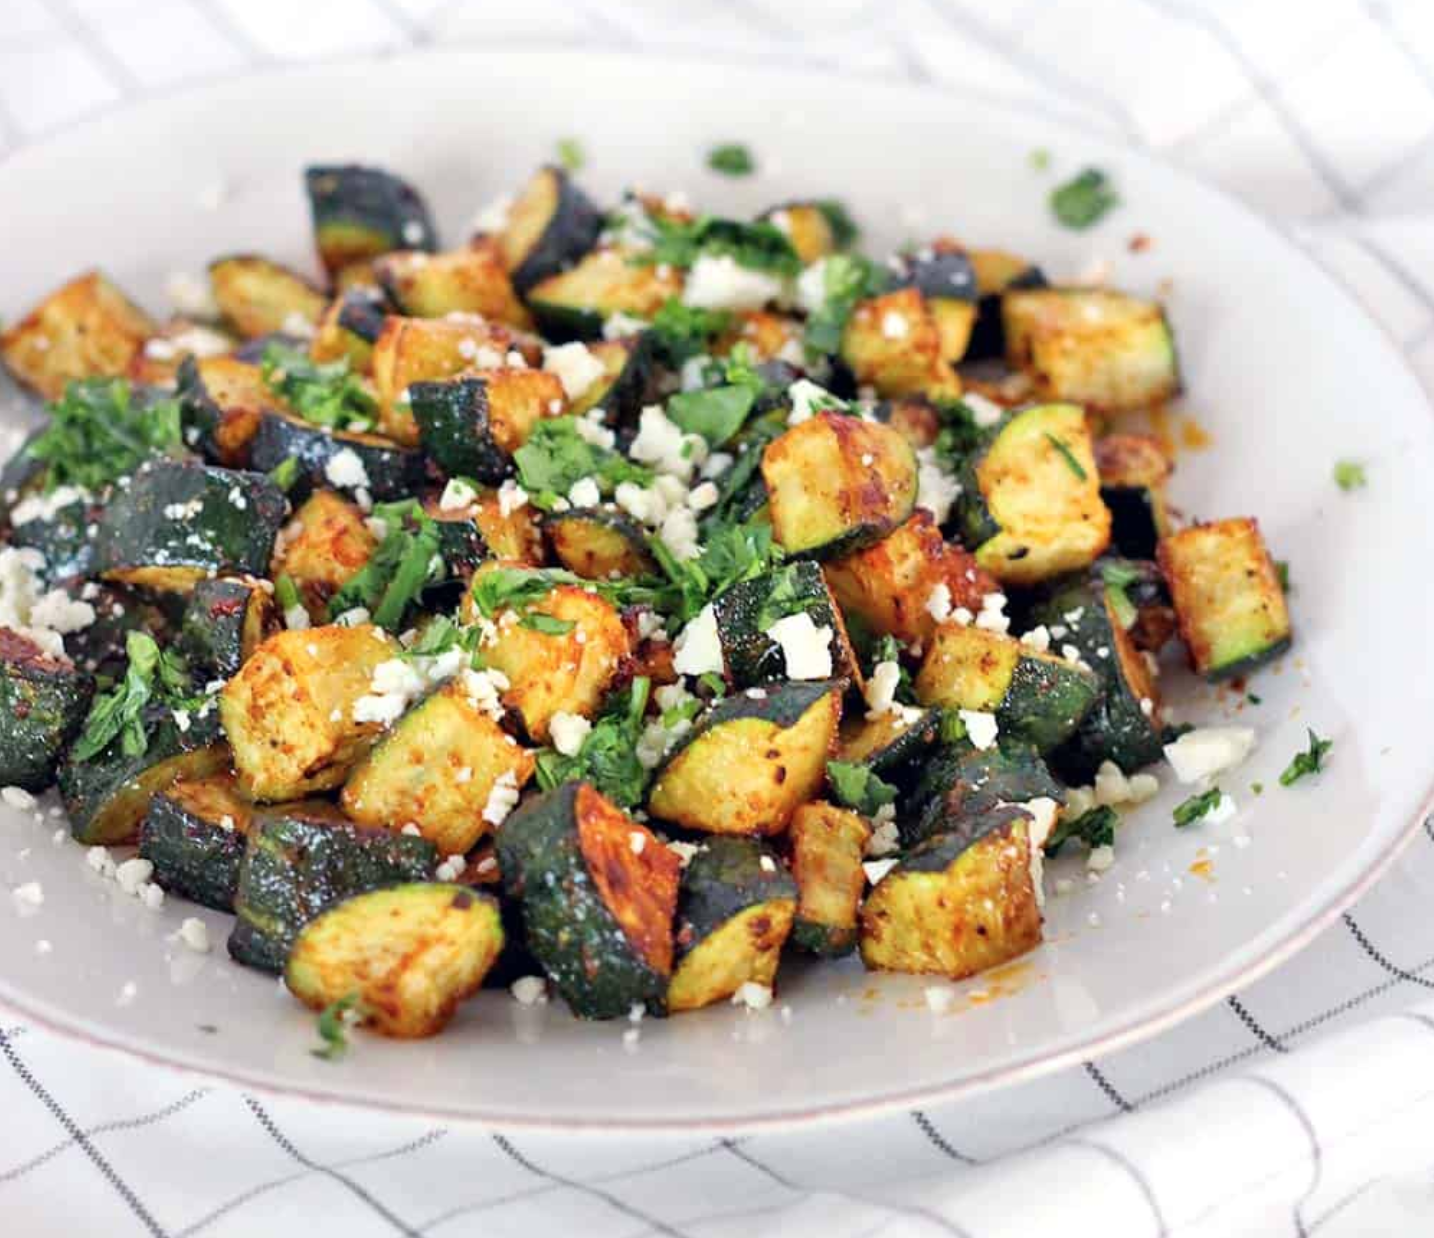 Denise's Kitchen: Mexican Roasted Zucchini